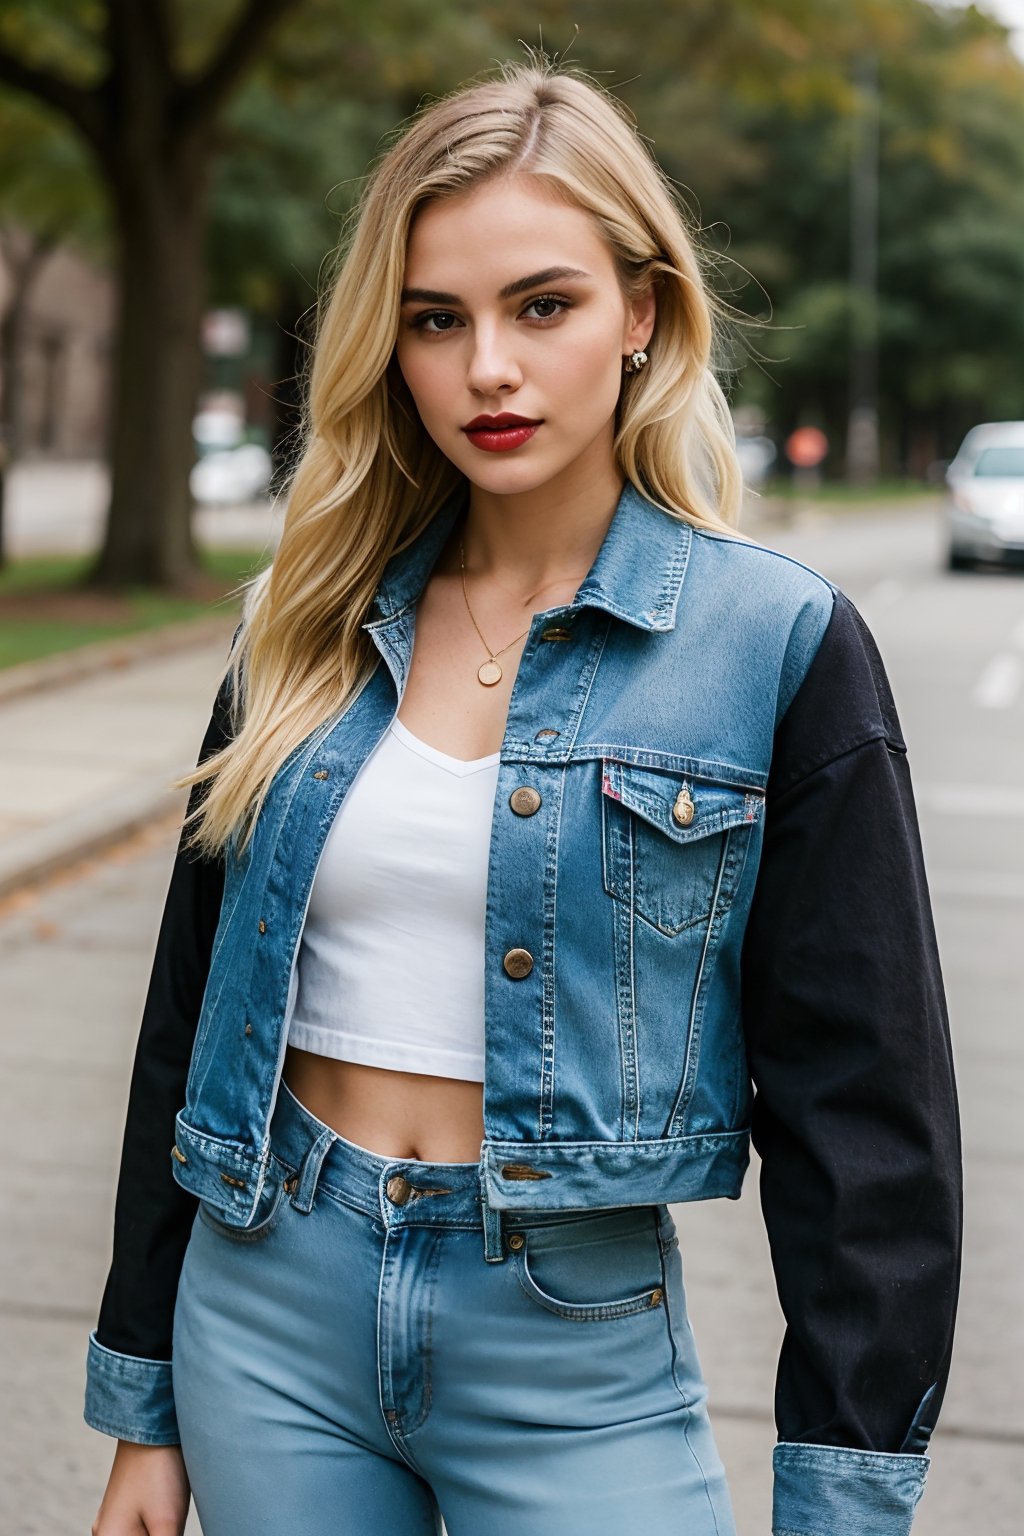 blonde and black hair, beautiful face, onlyfans model, hot dark lips, wearing cropped denim jacket and tight levis jeans in light blue color